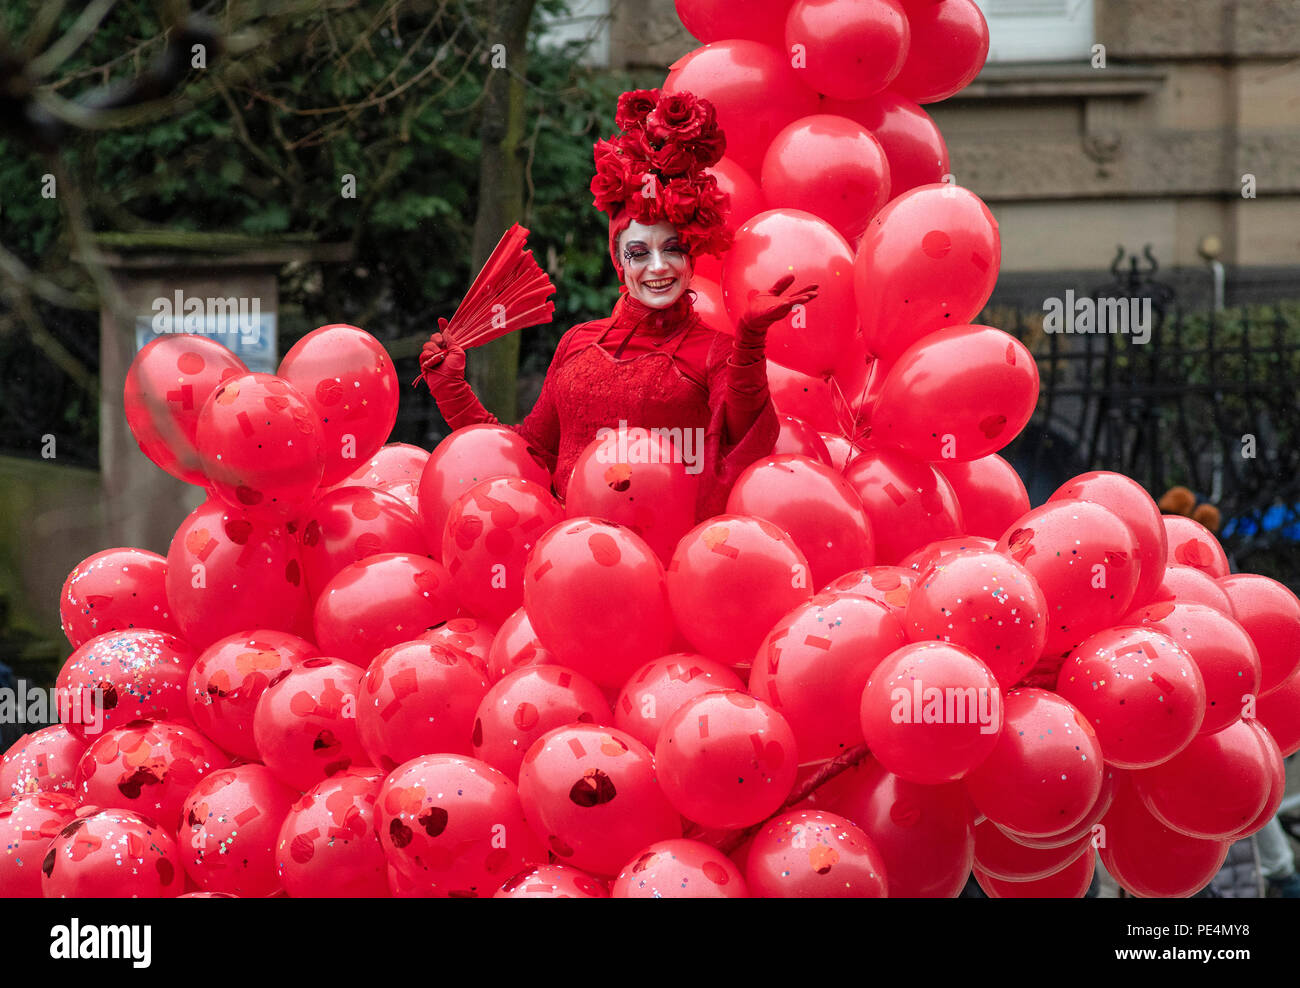 Woman with a whole heap of red balloons, Strasbourg carnival parade, Alsace, France, Europe, Stock Photo